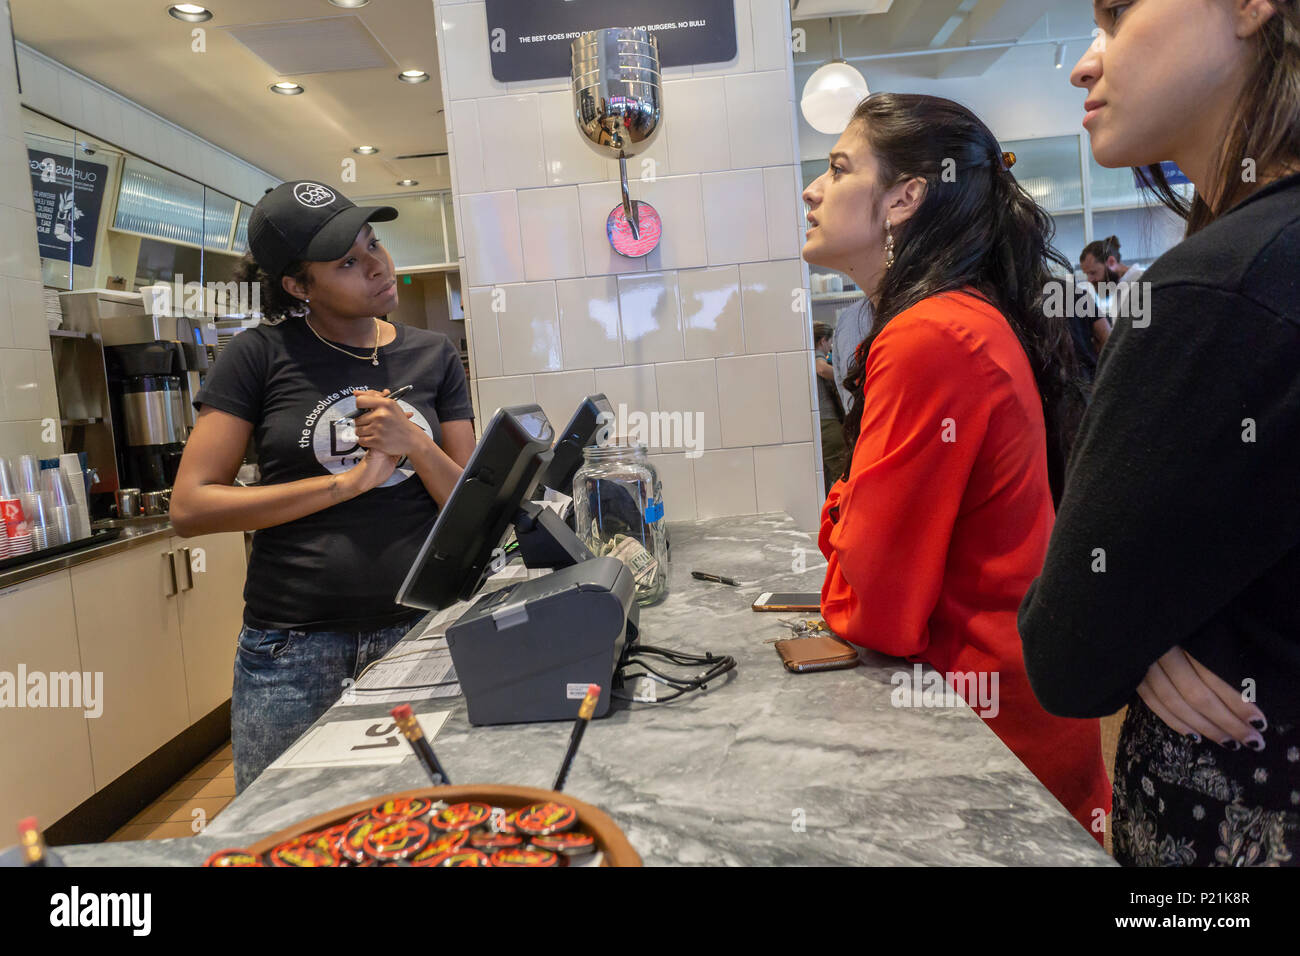 Customers place orders in the Dog Haus on opening day of their first New York store on Tuesday, June 12, 2018. Visitors were treated to a free hot dog as a welcome to their newest location in Soho. The chain specializes in fast casual dining of hot dogs, sausages, chicken  and burgers grilled on King Hawaiian rolls and topped with their signature 'builds'. Dog Haus was founded in 2010 in Pasadena, Caifornia with plans to open 300 new franchises by 2023. (Â© Richard B. Levine) Stock Photo